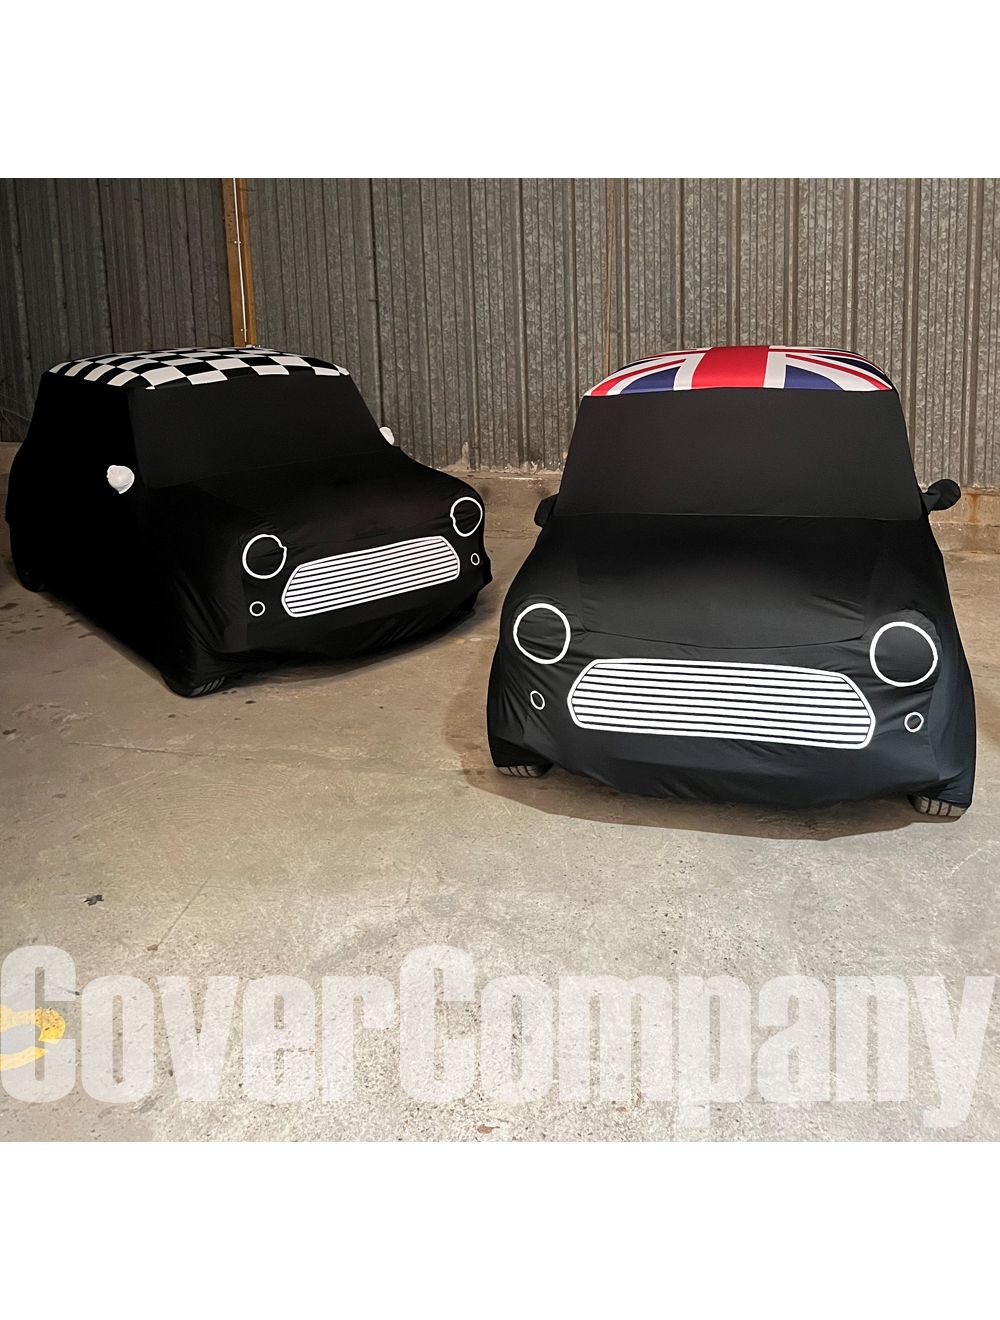 Housse Voiture Mini Super Protection - Cover Company France